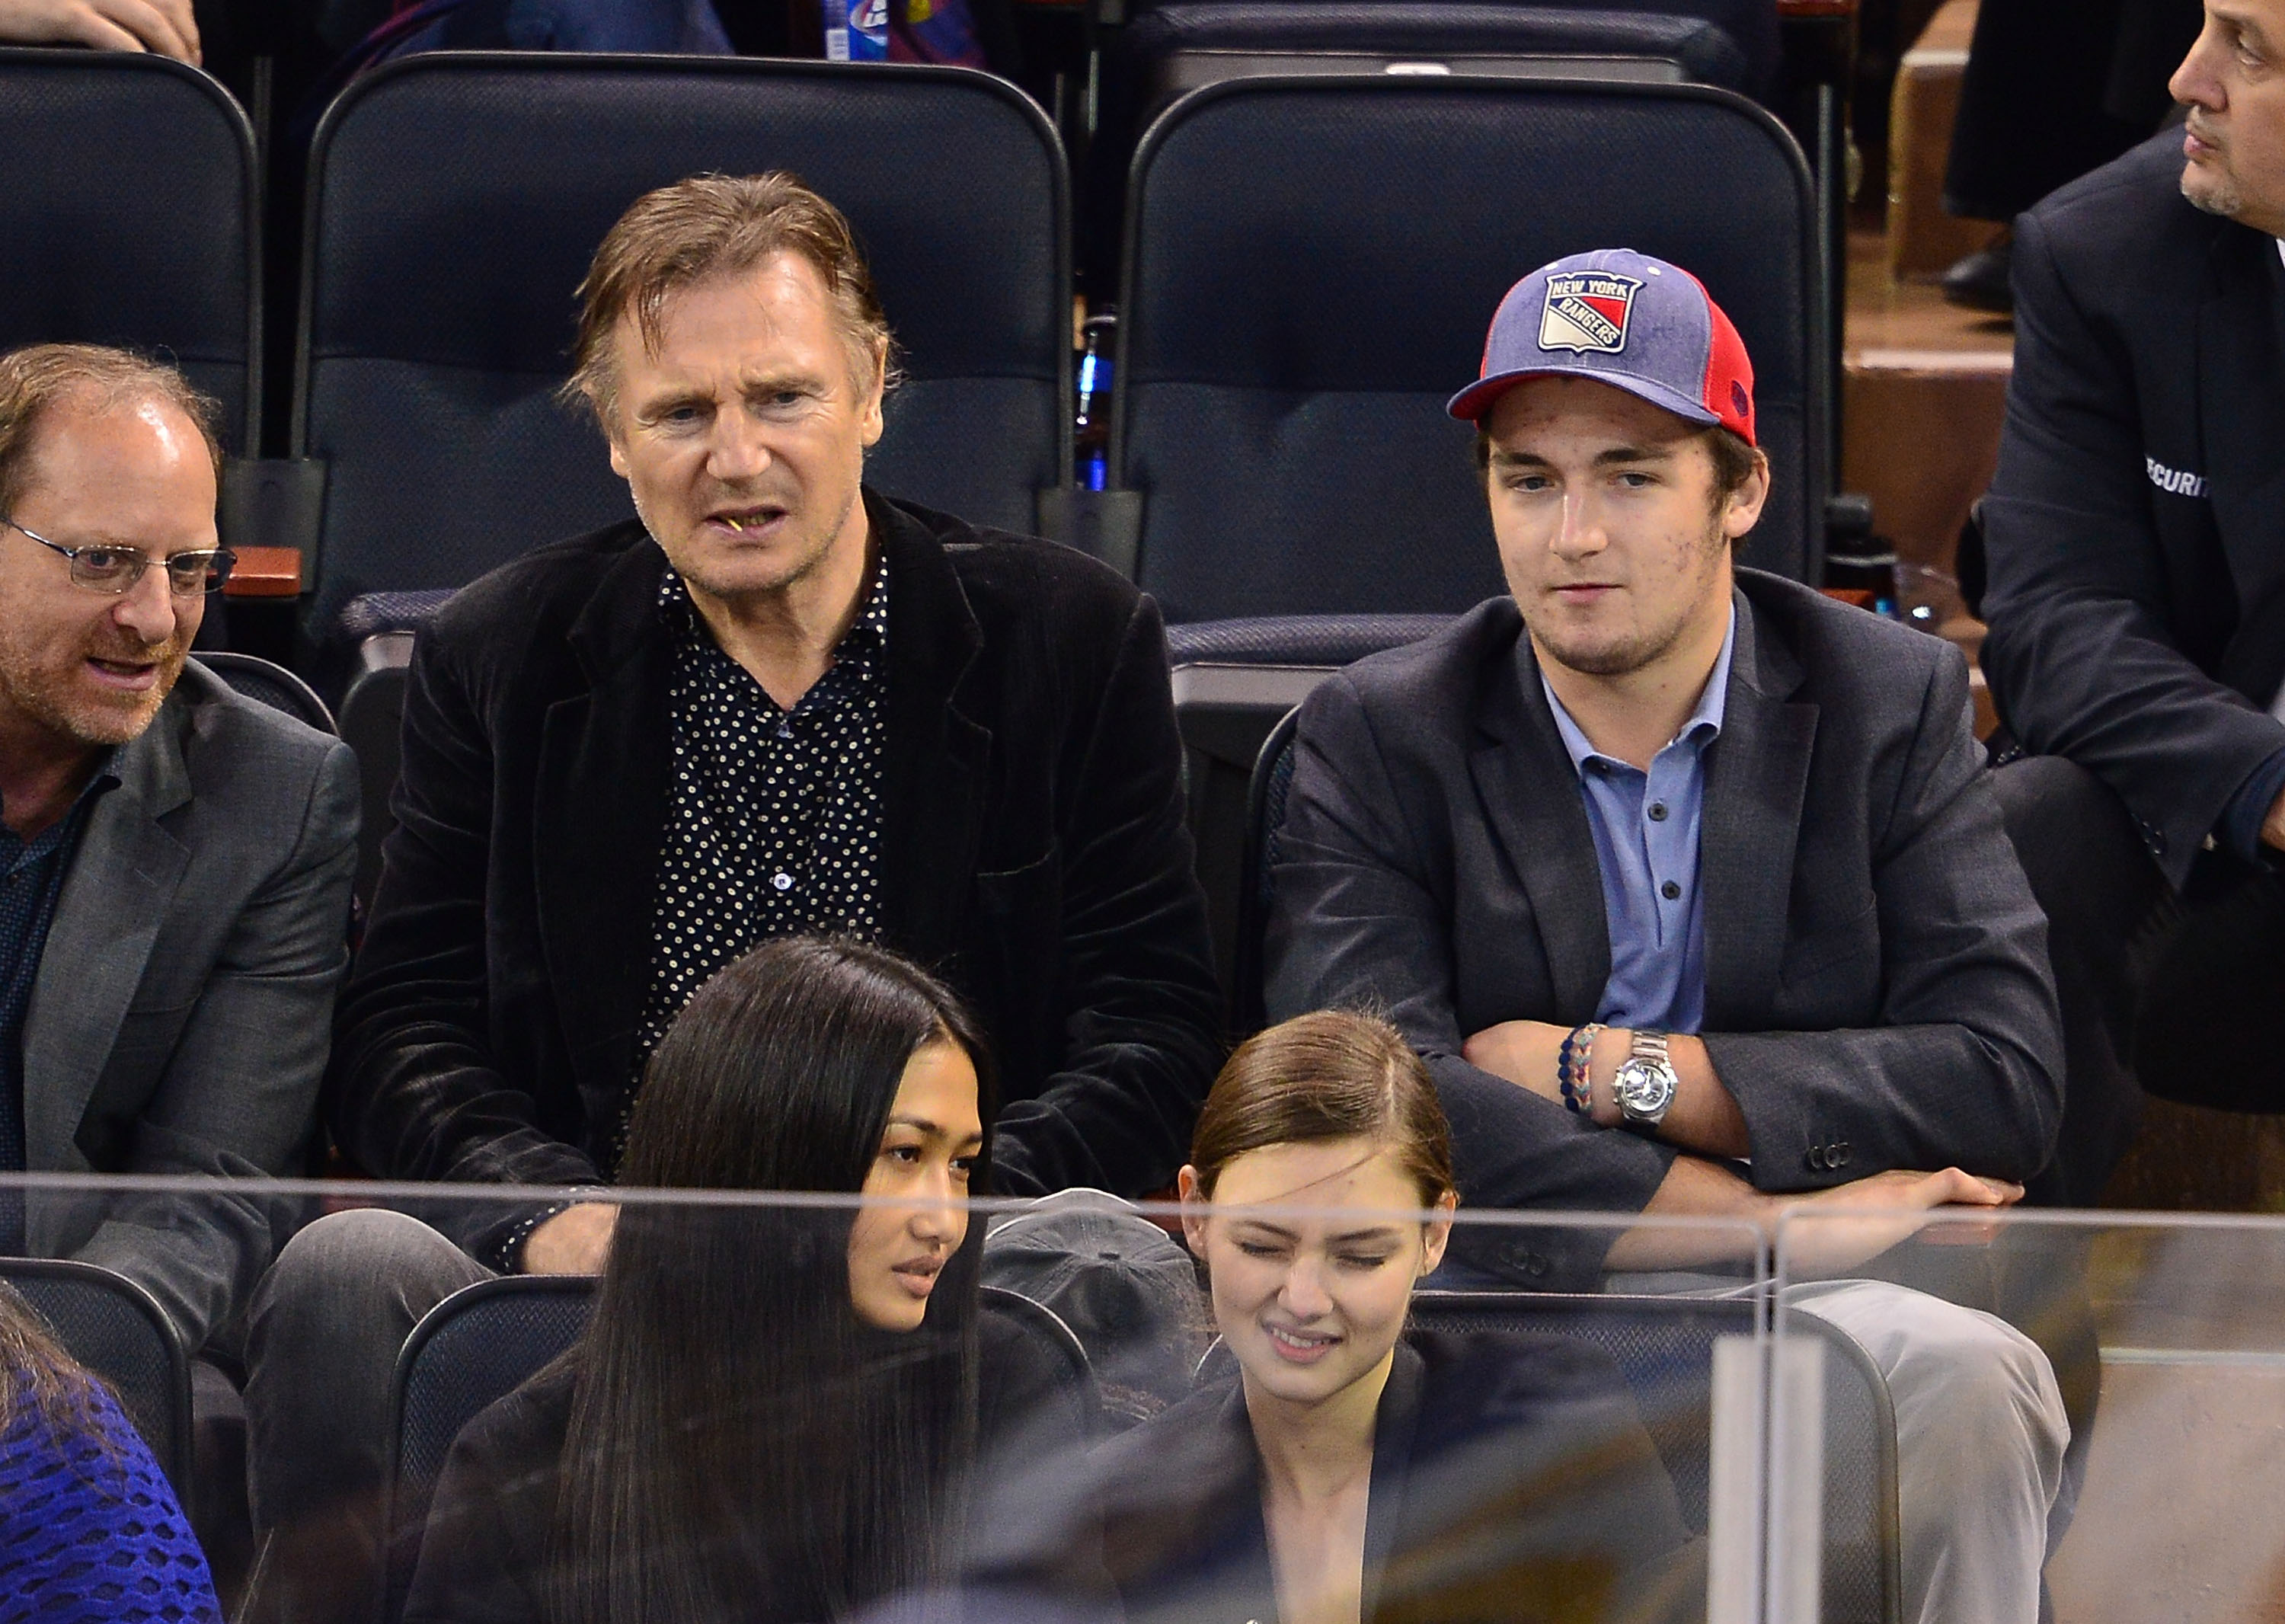 Liam Neeson and son, Daniel Neeson, during the New York Islanders vs New York Rangers game at Madison Square Garden on October 14, 2014 in New York City. / Source: Getty Images